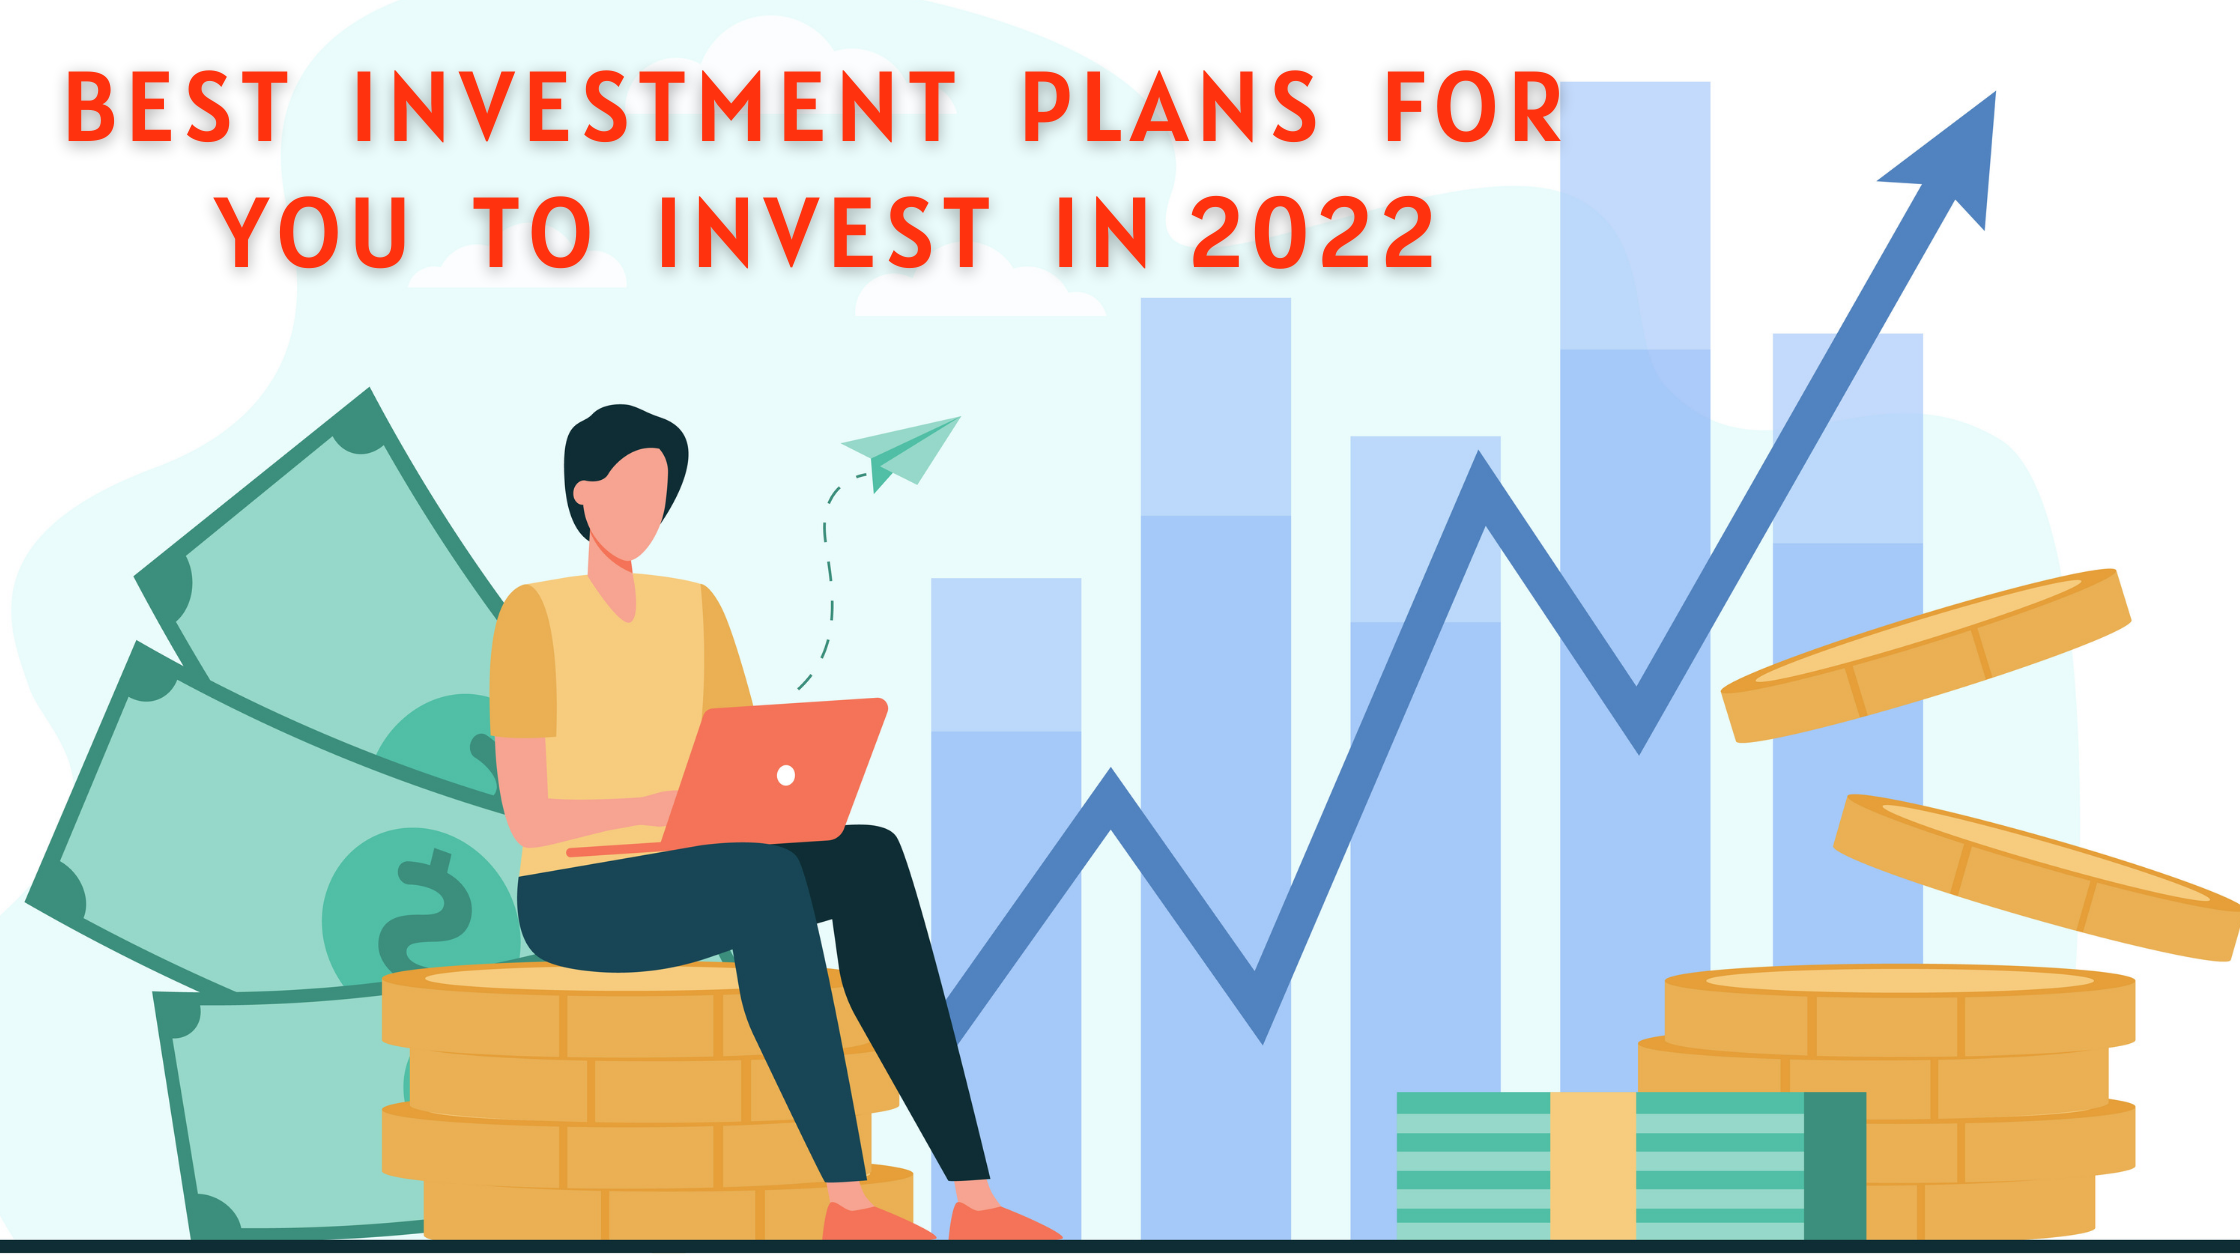 Investment Plans for 2022